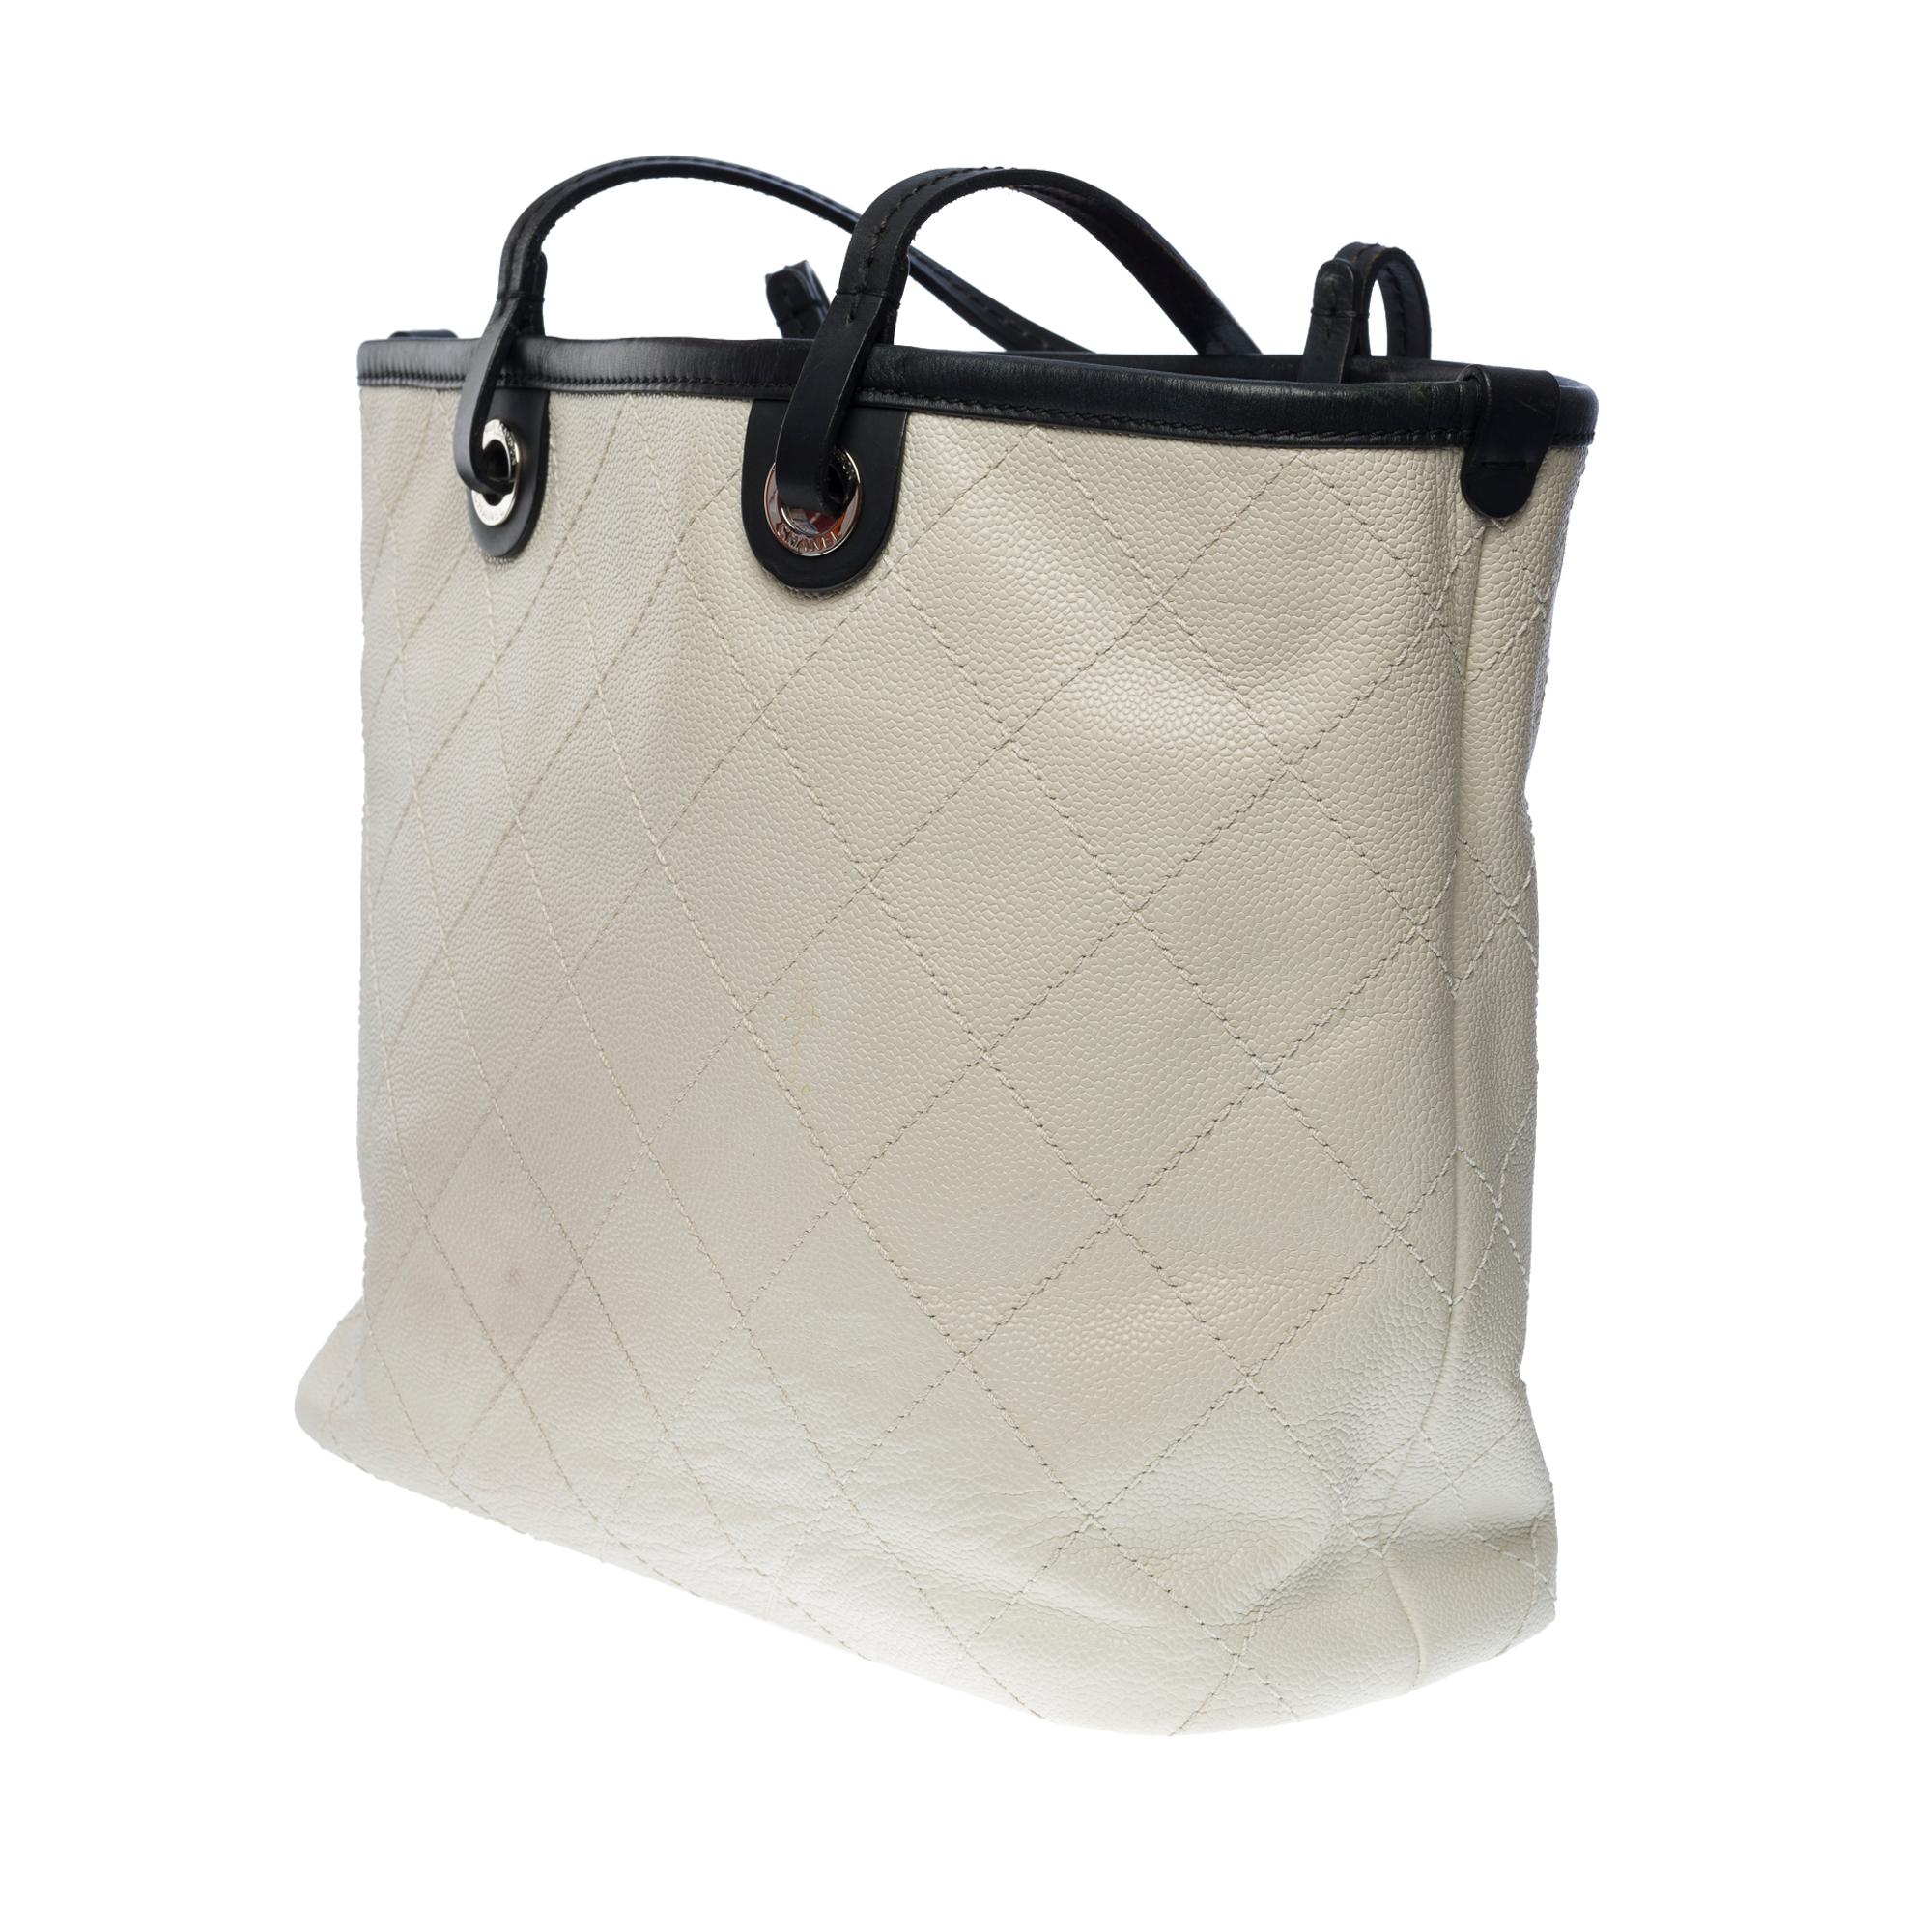 Amazing Chanel Shopping Tote bag in White Caviar quilted leather, SHW 1